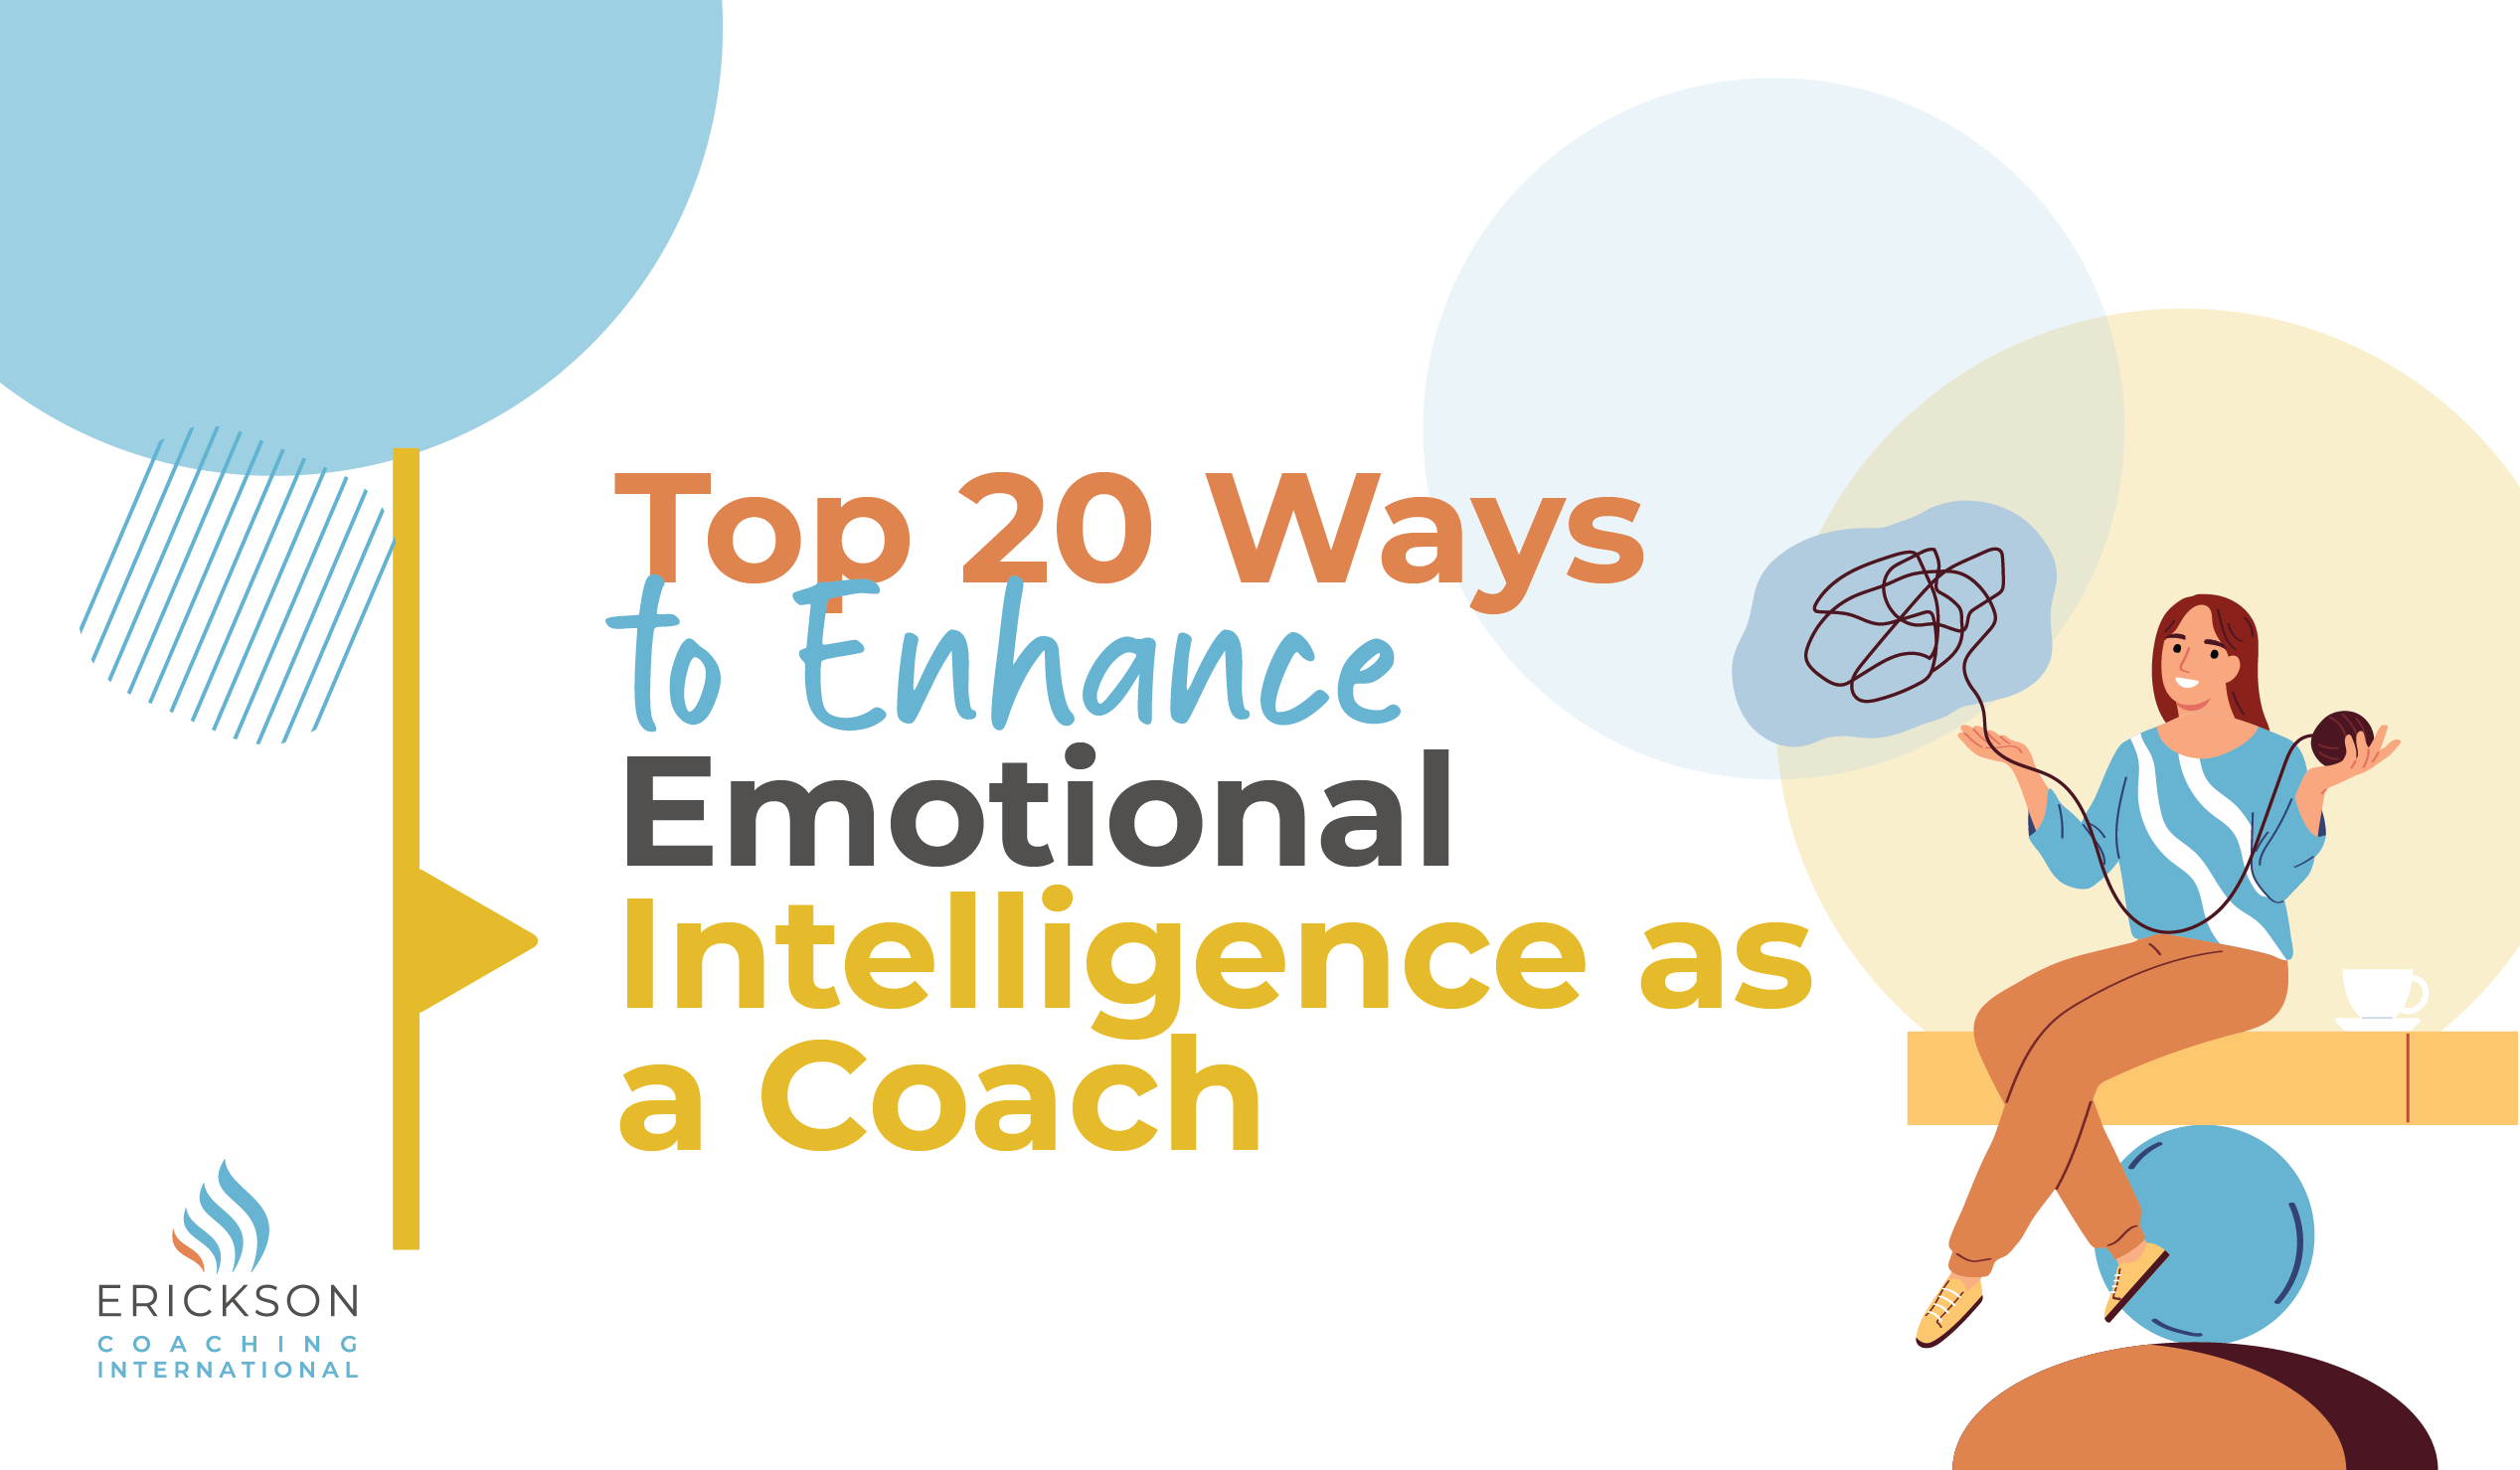 Top 20 Ways to Enhance Emotional Intelligence as a Coach